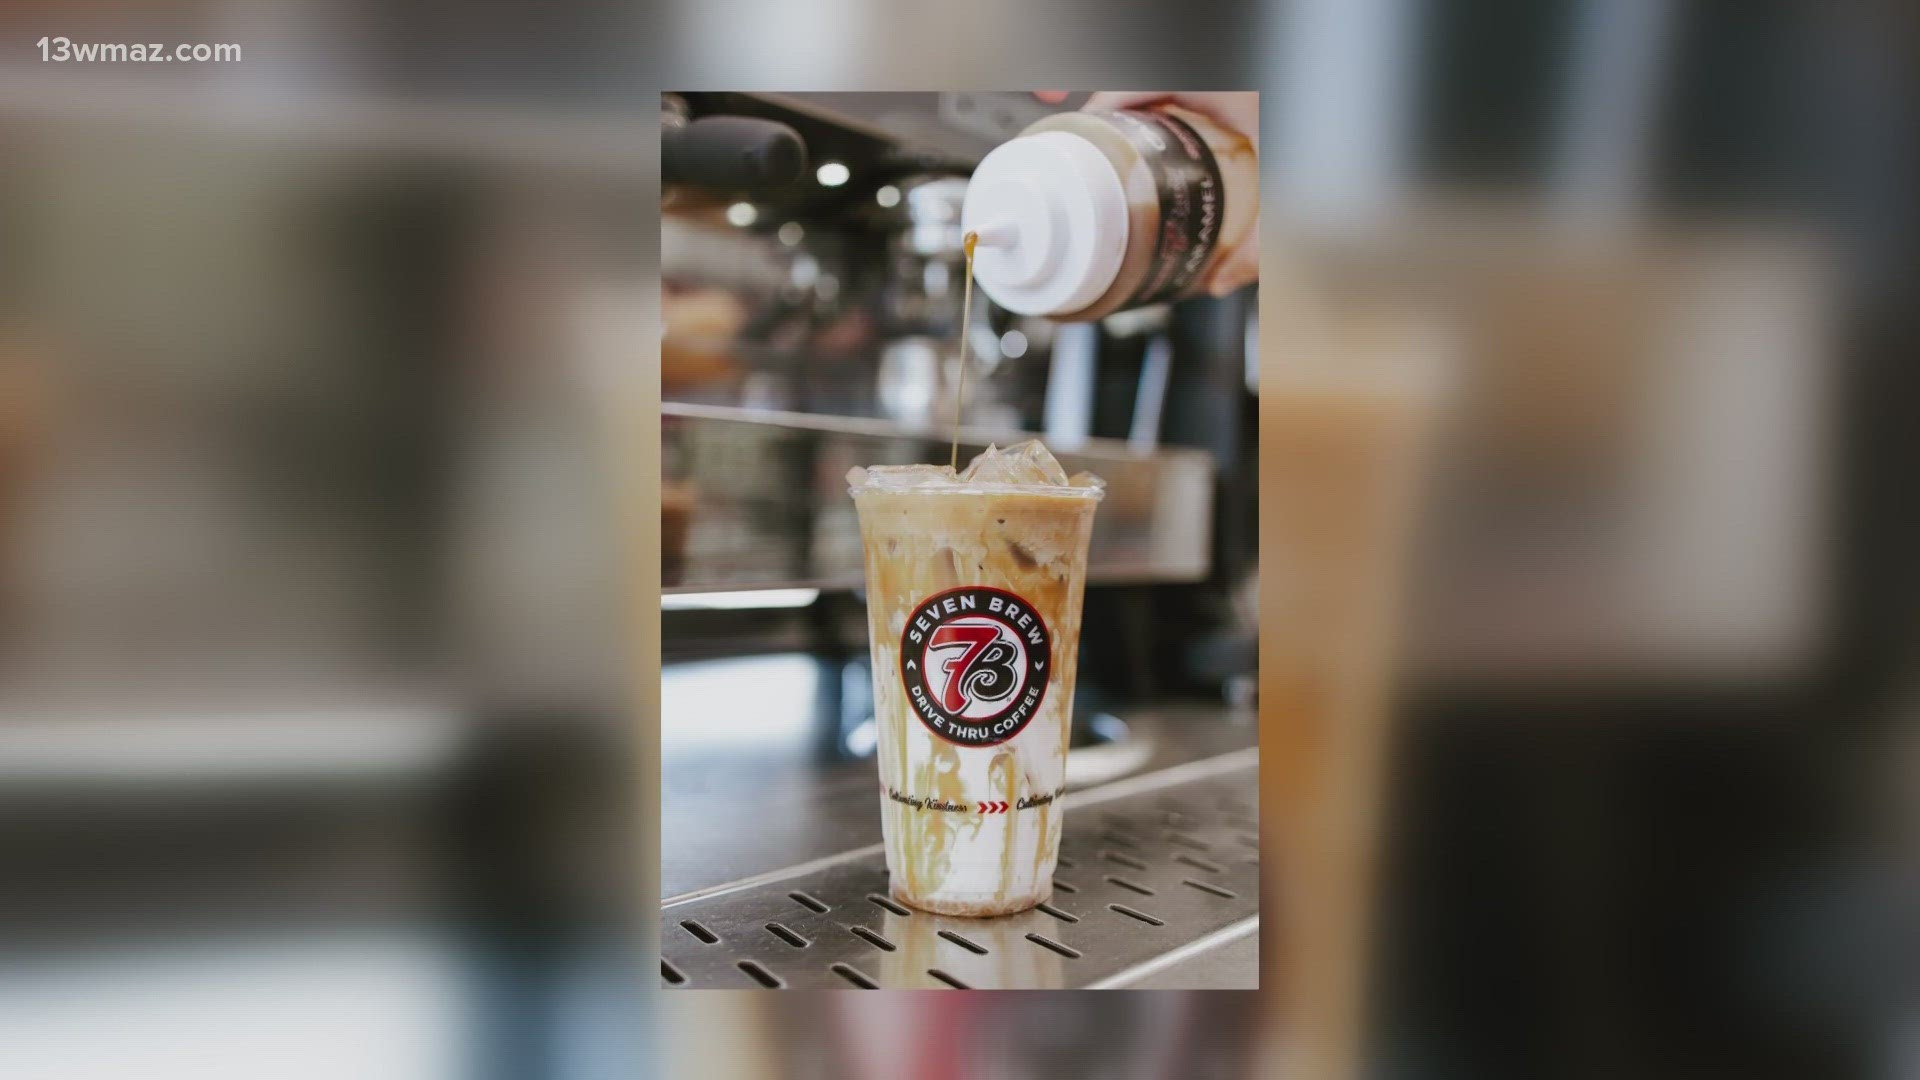 The coffee shop is opening up two Central Georgia locations: one in Warner Robins and another in Macon on Bass Road.